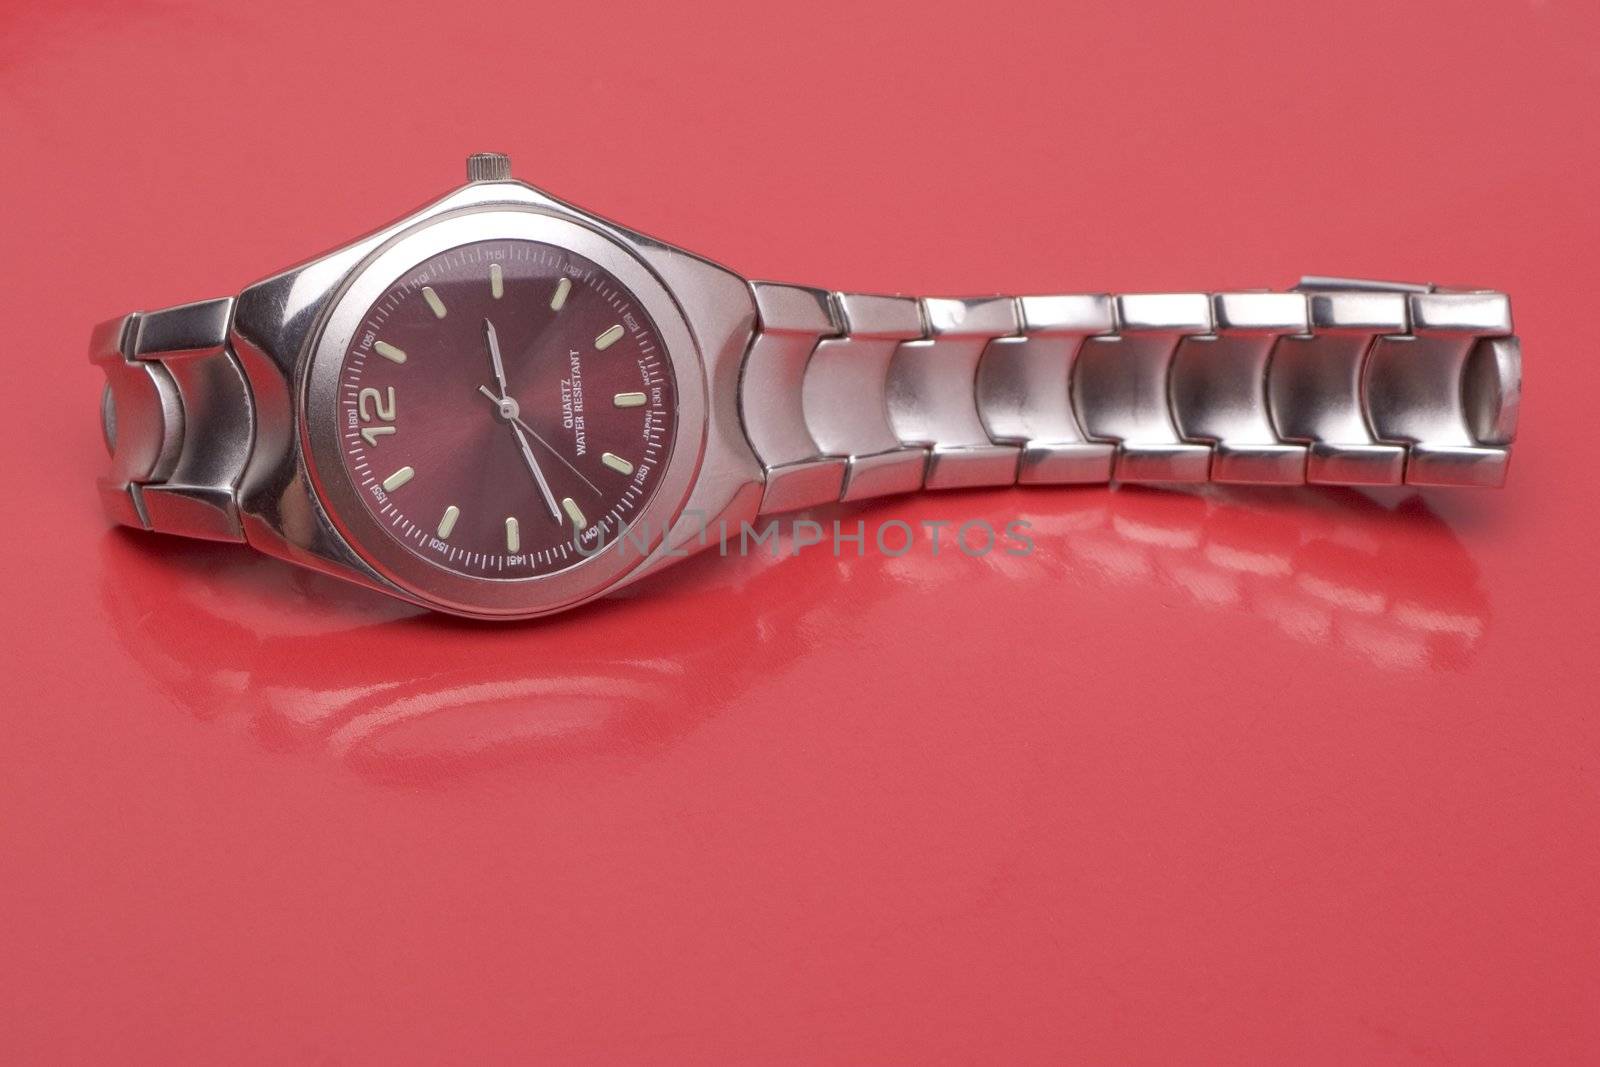 Men sport watch on it's side, reflecting on red surface